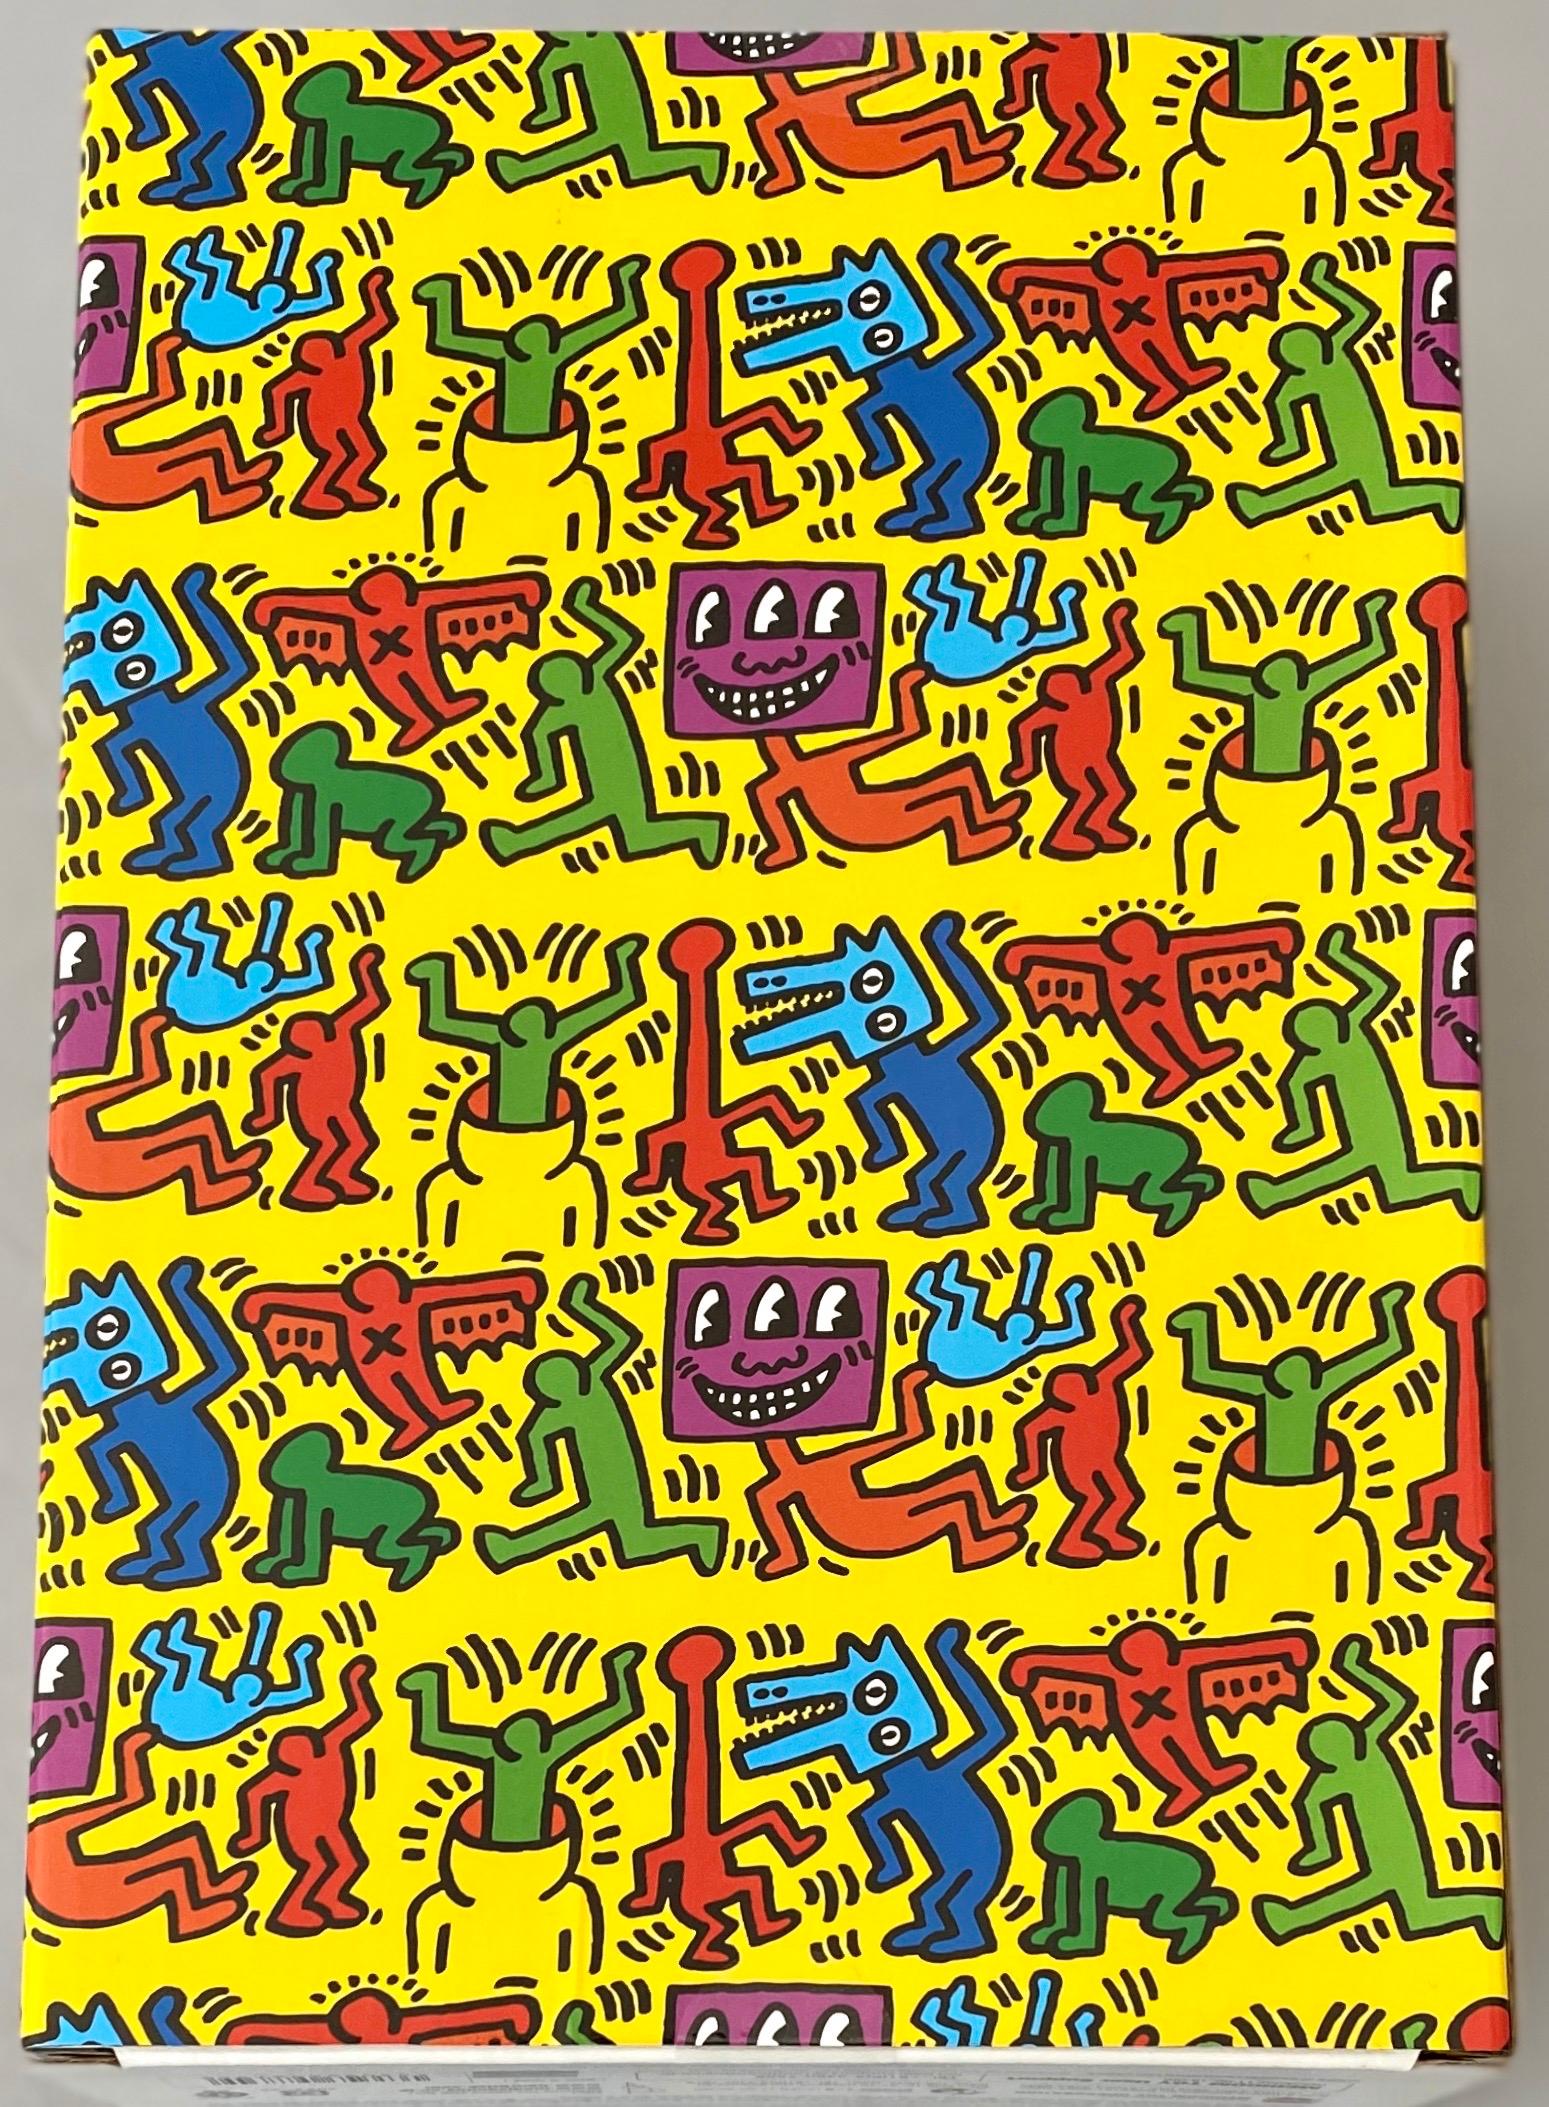 Keith Haring Bearbrick 400% figure (Haring BE@RBRICK) - Street Art Sculpture by (after) Keith Haring